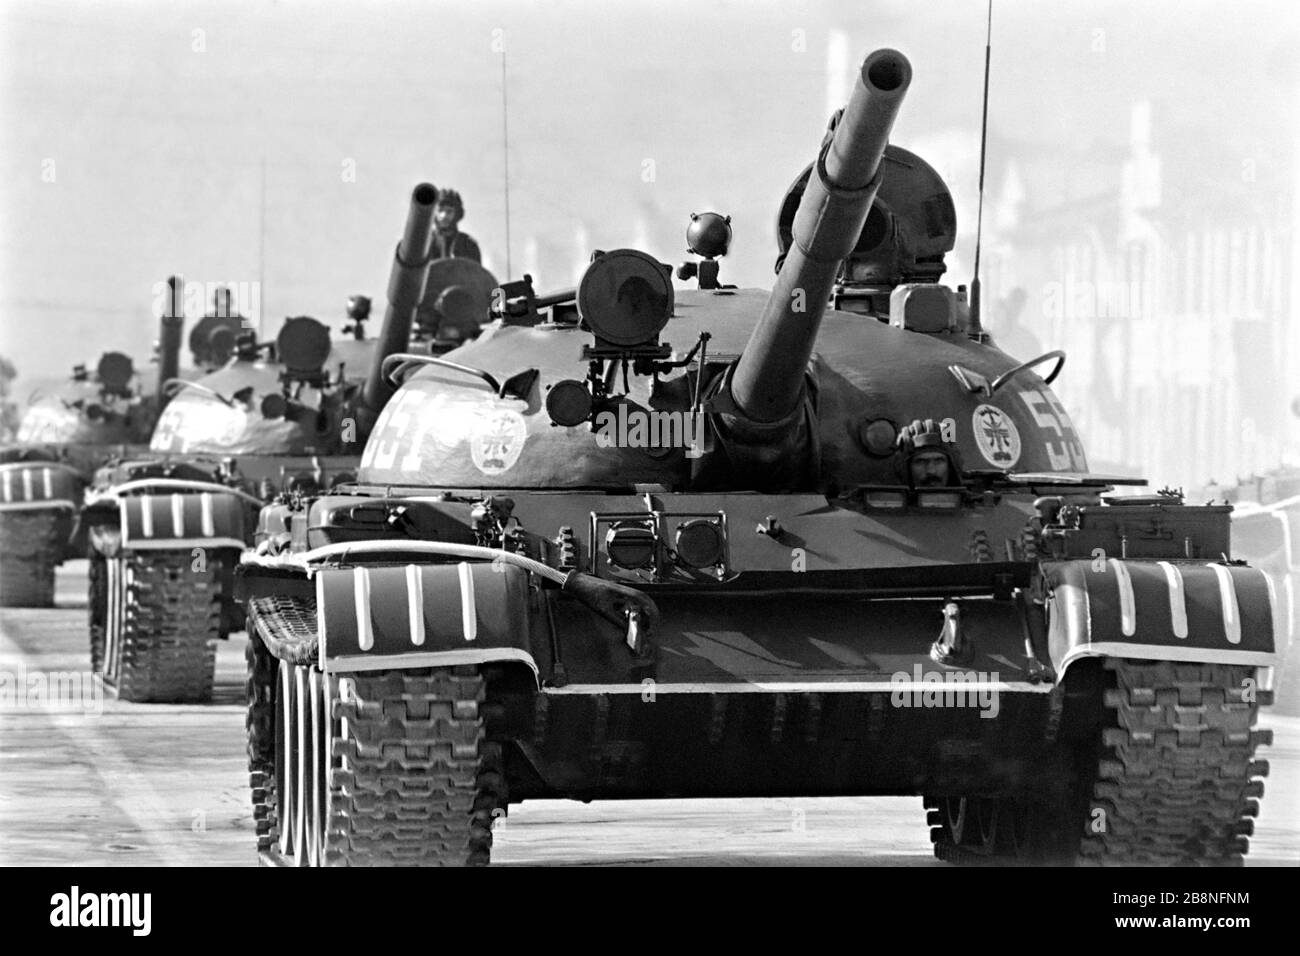 afghan-soldiers-ride-a-soviet-made-t-62-main-battle-tank-during-a-military-parade-to-mark-the-...jpg